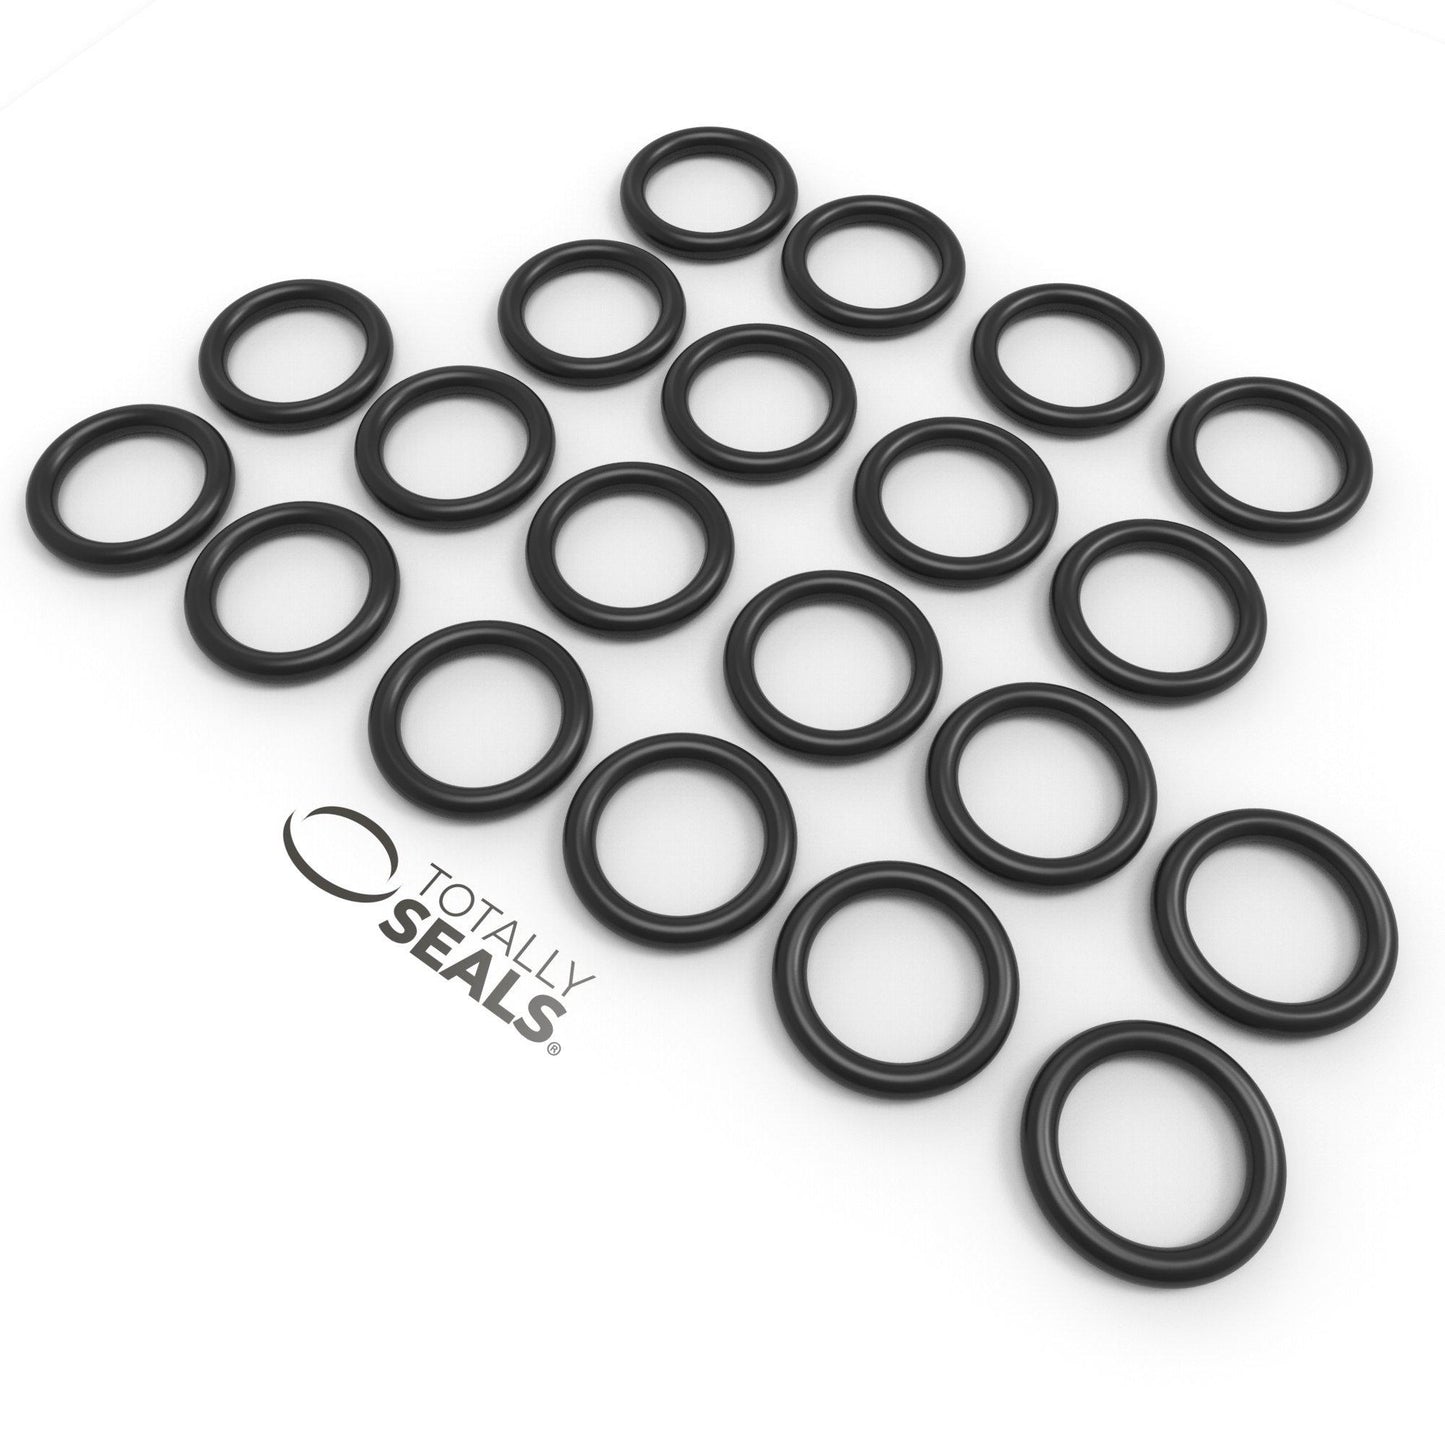 15mm x 1mm (17mm OD) Nitrile O-Rings - Totally Seals®